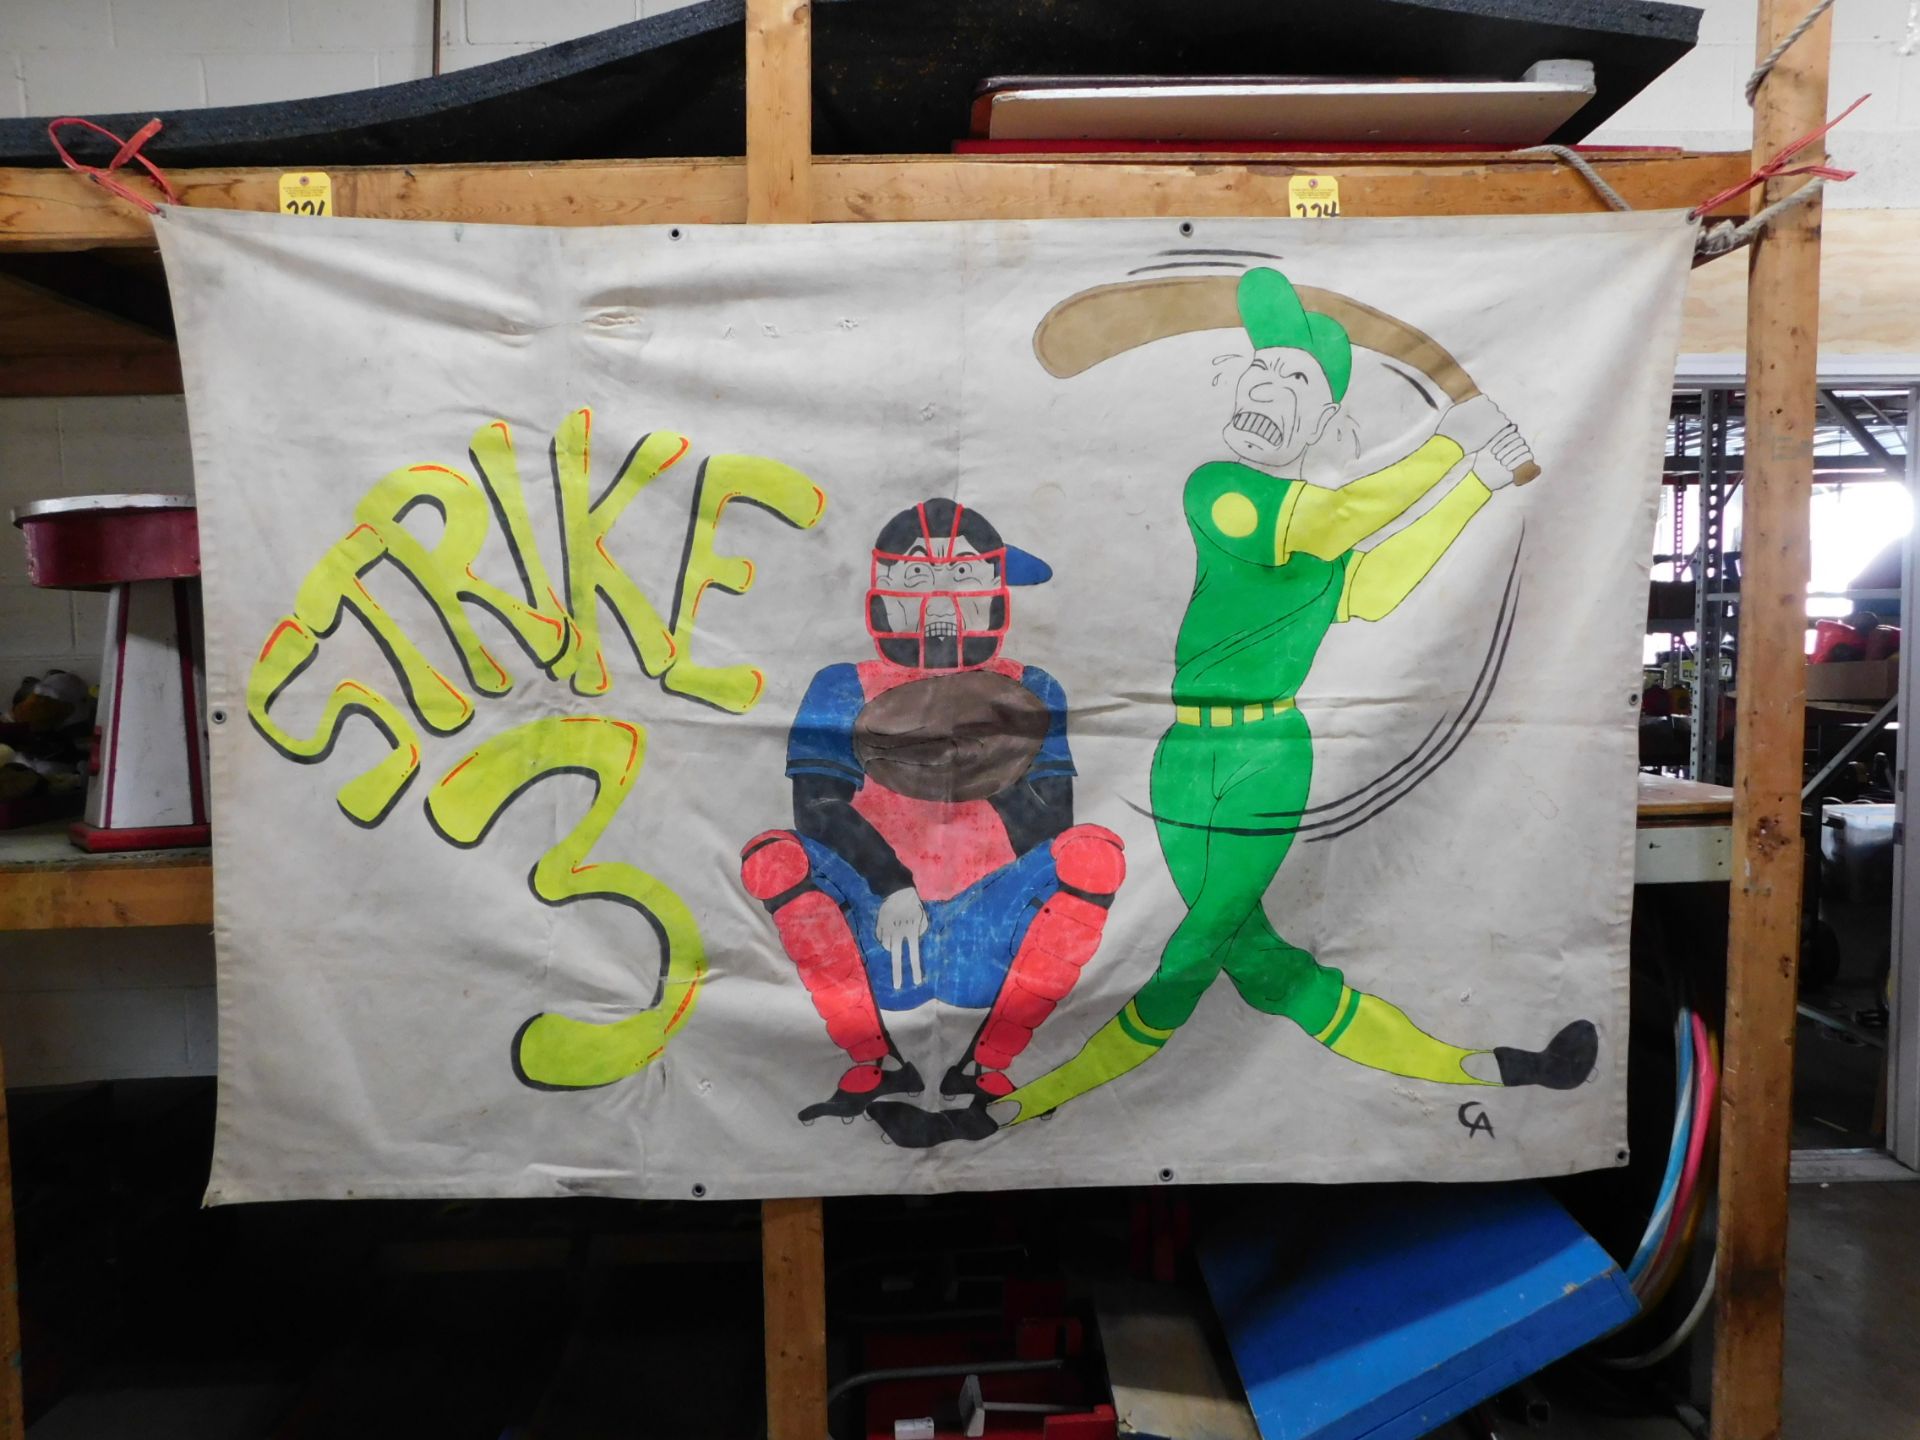 Strike 3 Game Backdrop, hand Painted 7' X 5' Tall